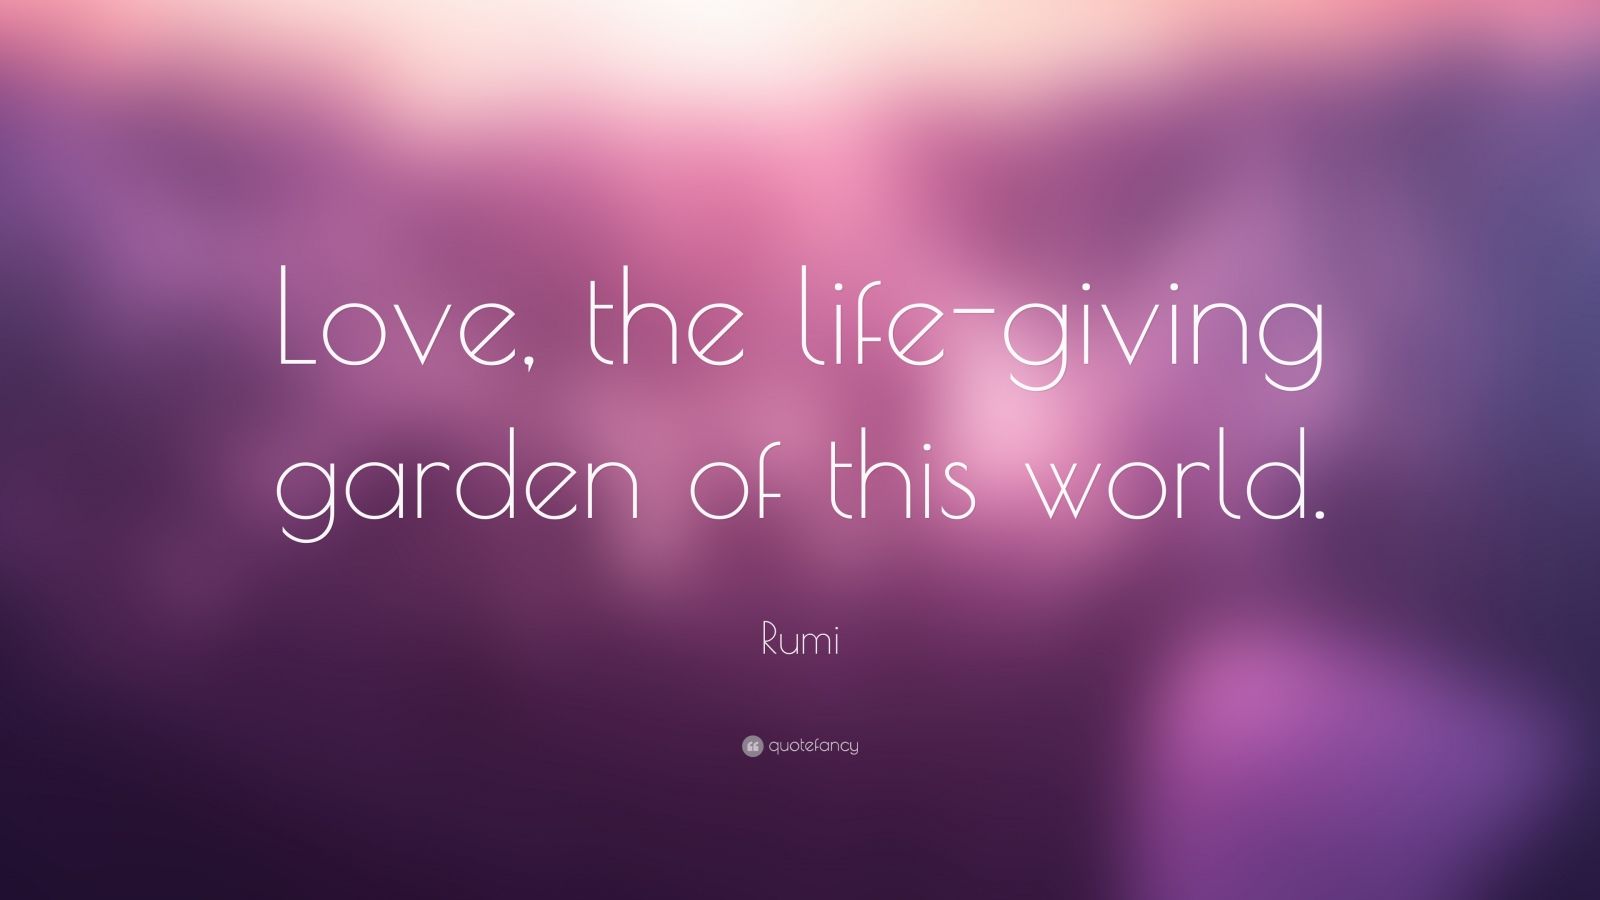 Rumi Quote: "Love, the life-giving garden of this world." (10 wallpapers) - Quotefancy